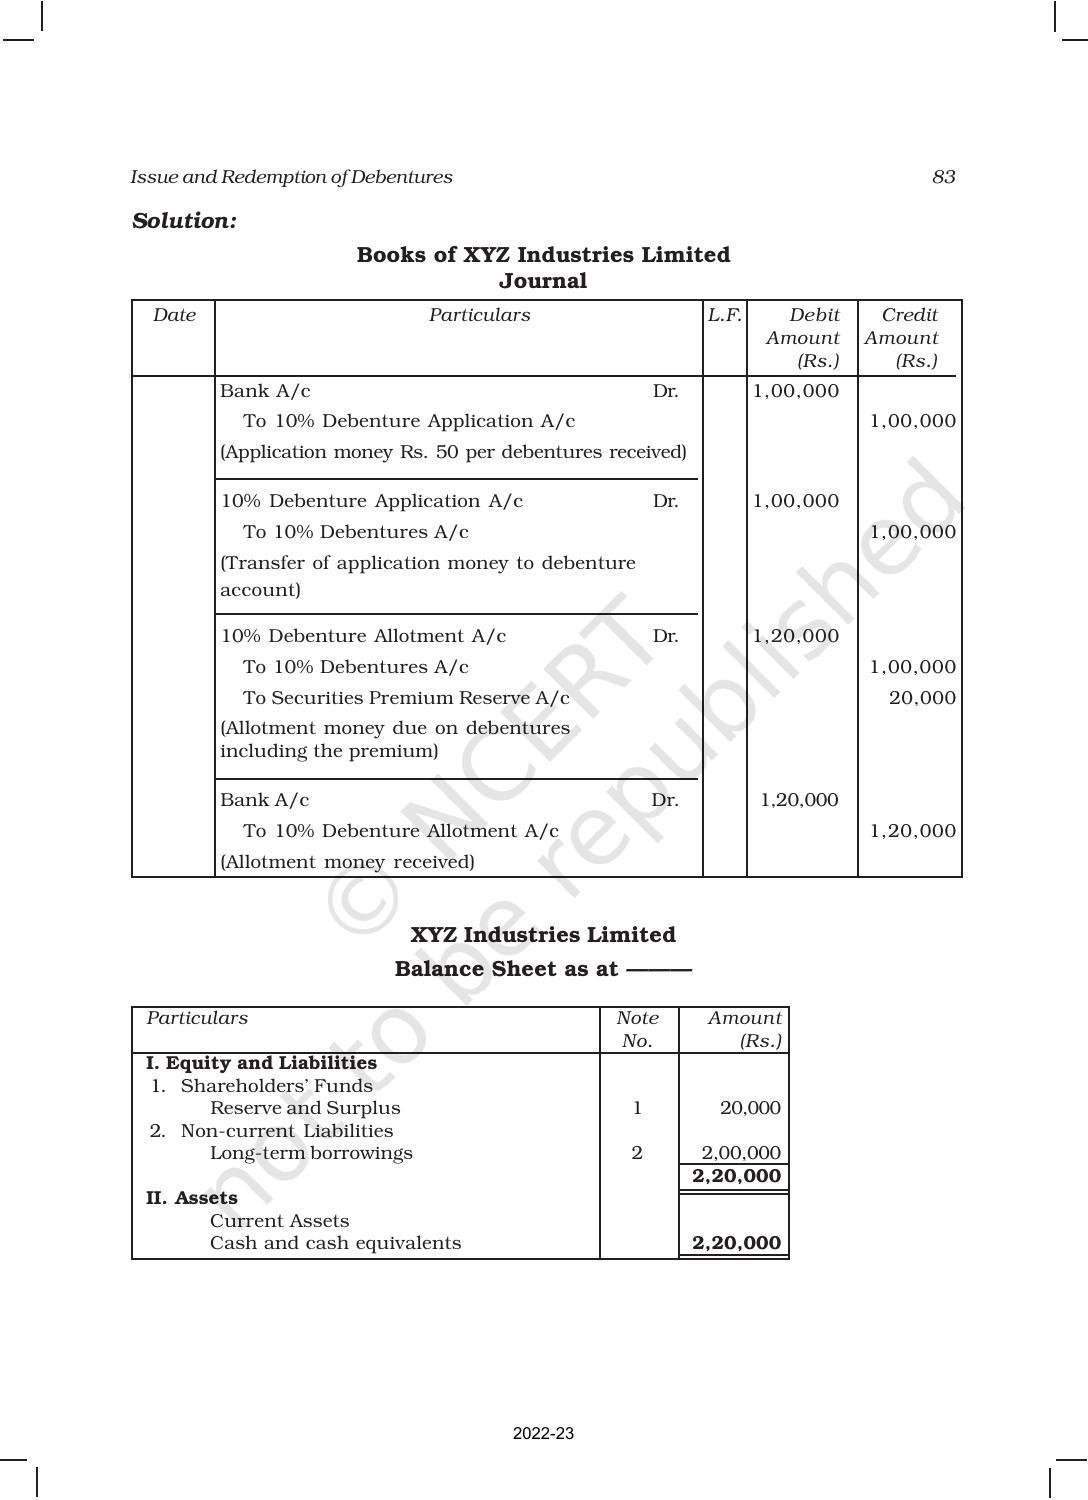 NCERT Book for Class 12 Accountancy Part II Chapter 1 Issue and Redemption of Debentures - Page 9